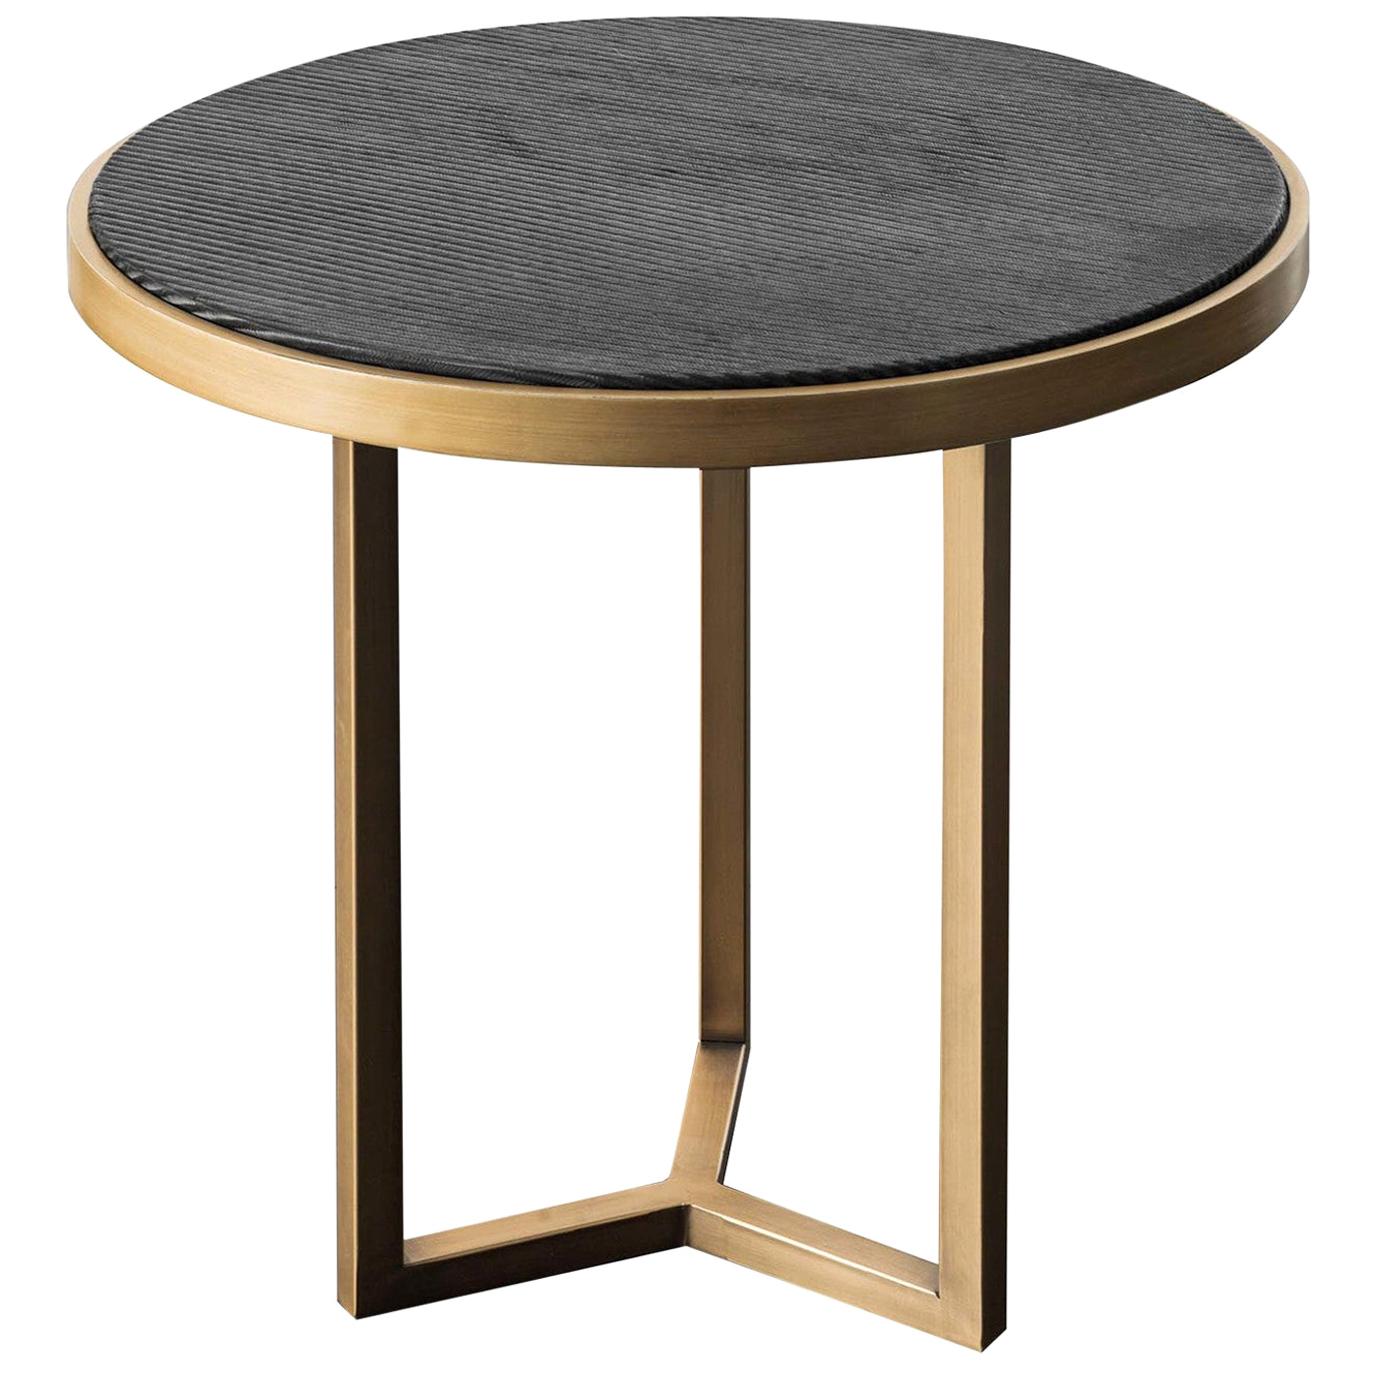 Romeo Black and Gold Side Table by Chiara Provasi